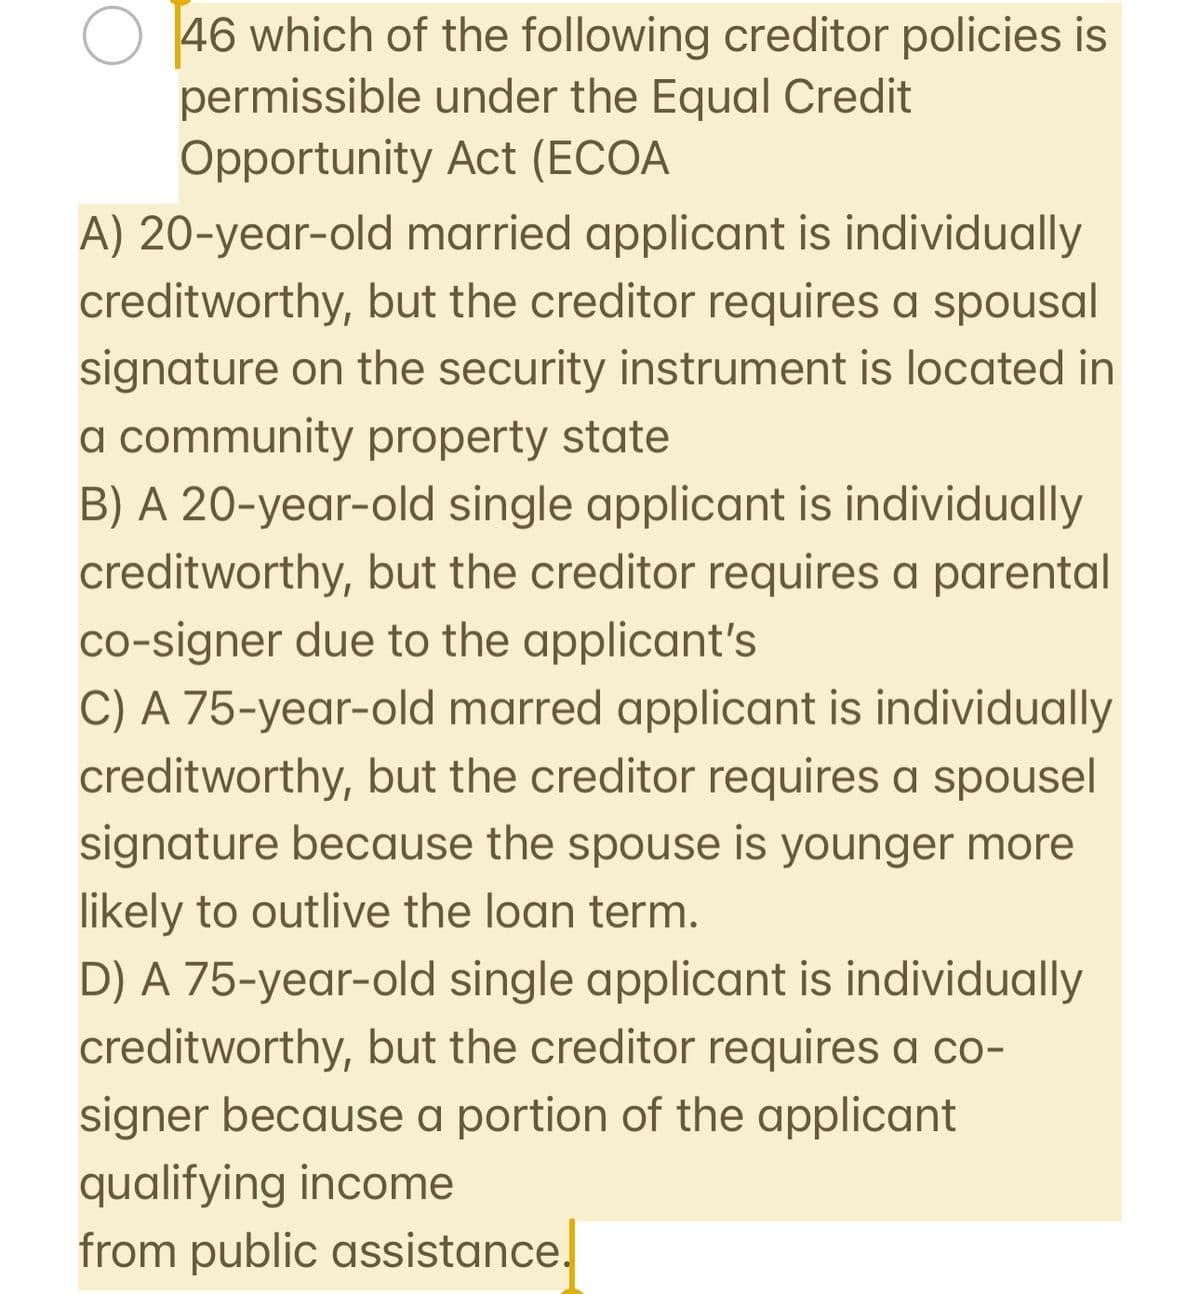 46 which of the following creditor policies is
permissible under the Equal Credit
Opportunity Act (ECOA
A) 20-year-old married applicant is individually
creditworthy, but the creditor requires a spousal
signature on the security instrument is located in
a community property state
B) A 20-year-old single applicant is individually
creditworthy, but the creditor requires a parental
co-signer due to the applicant's
C) A 75-year-old marred applicant is individually
creditworthy, but the creditor requires a spousel
signature because the spouse is younger more
likely to outlive the loan term.
D) A 75-year-old single applicant is individually
creditworthy, but the creditor requires a co-
signer because a portion of the applicant
qualifying income
from public assistance.